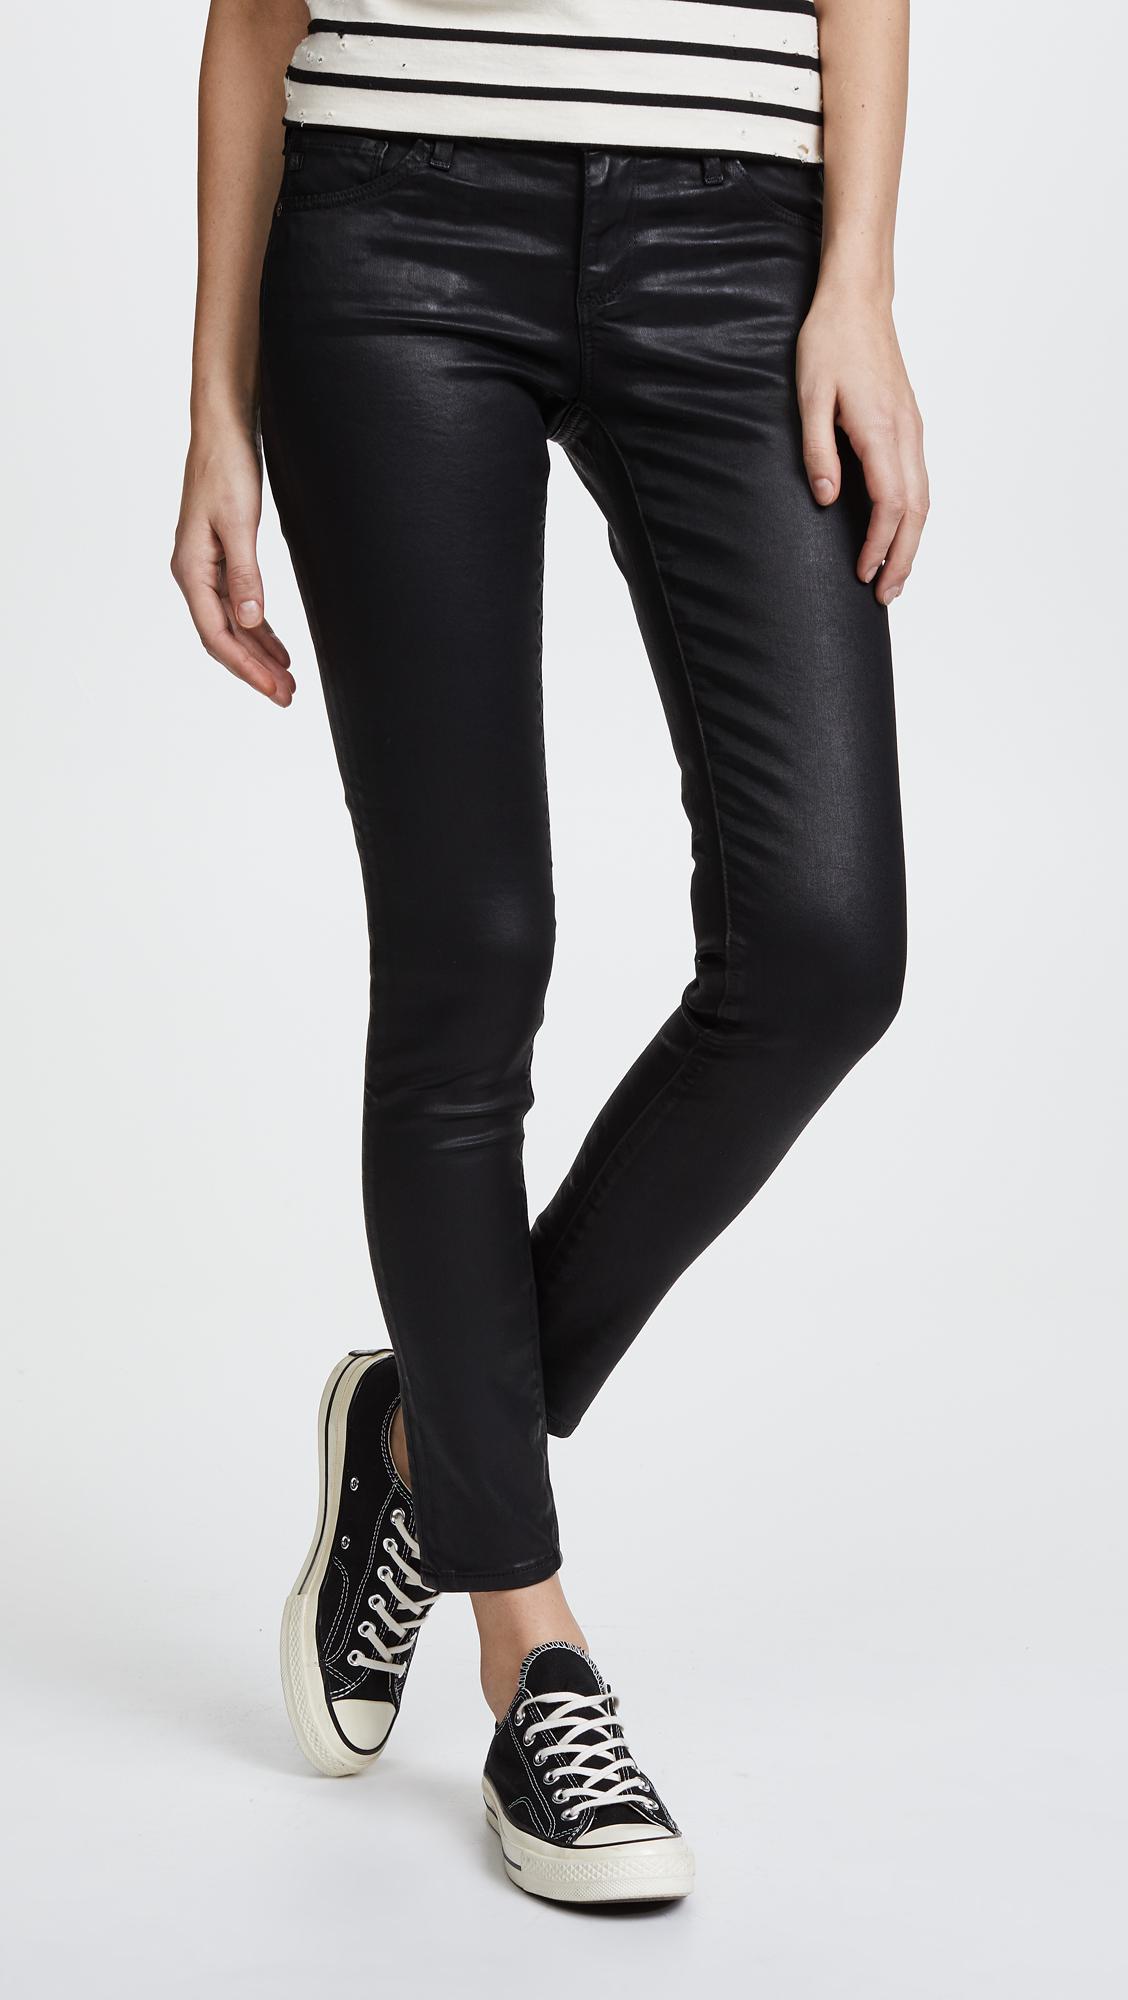 Lyst - AG Jeans The Legging Ankle Jeans in Black